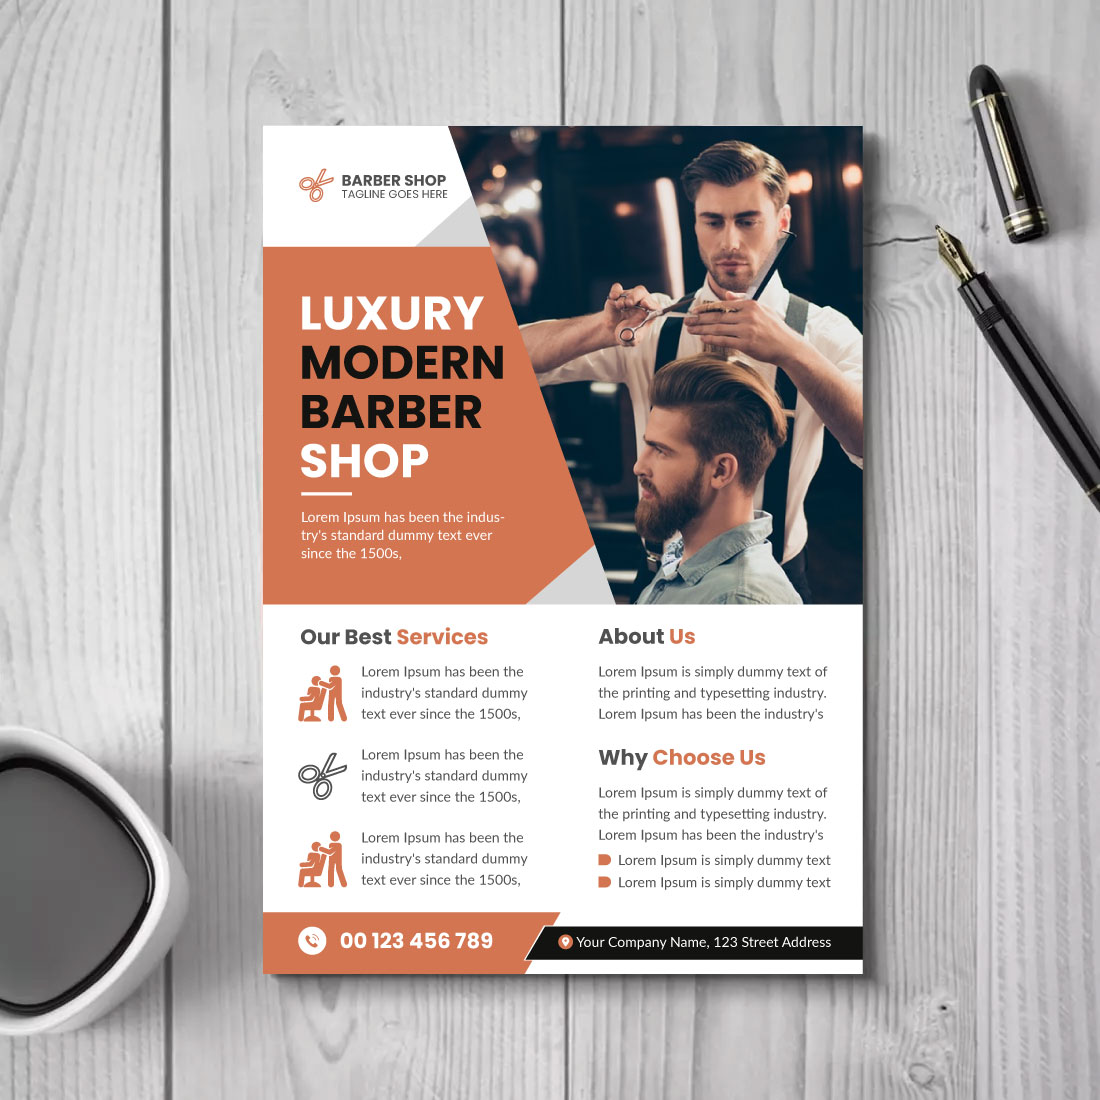 06 Luxury Barber Shop Flyer Or Poster Template main image.